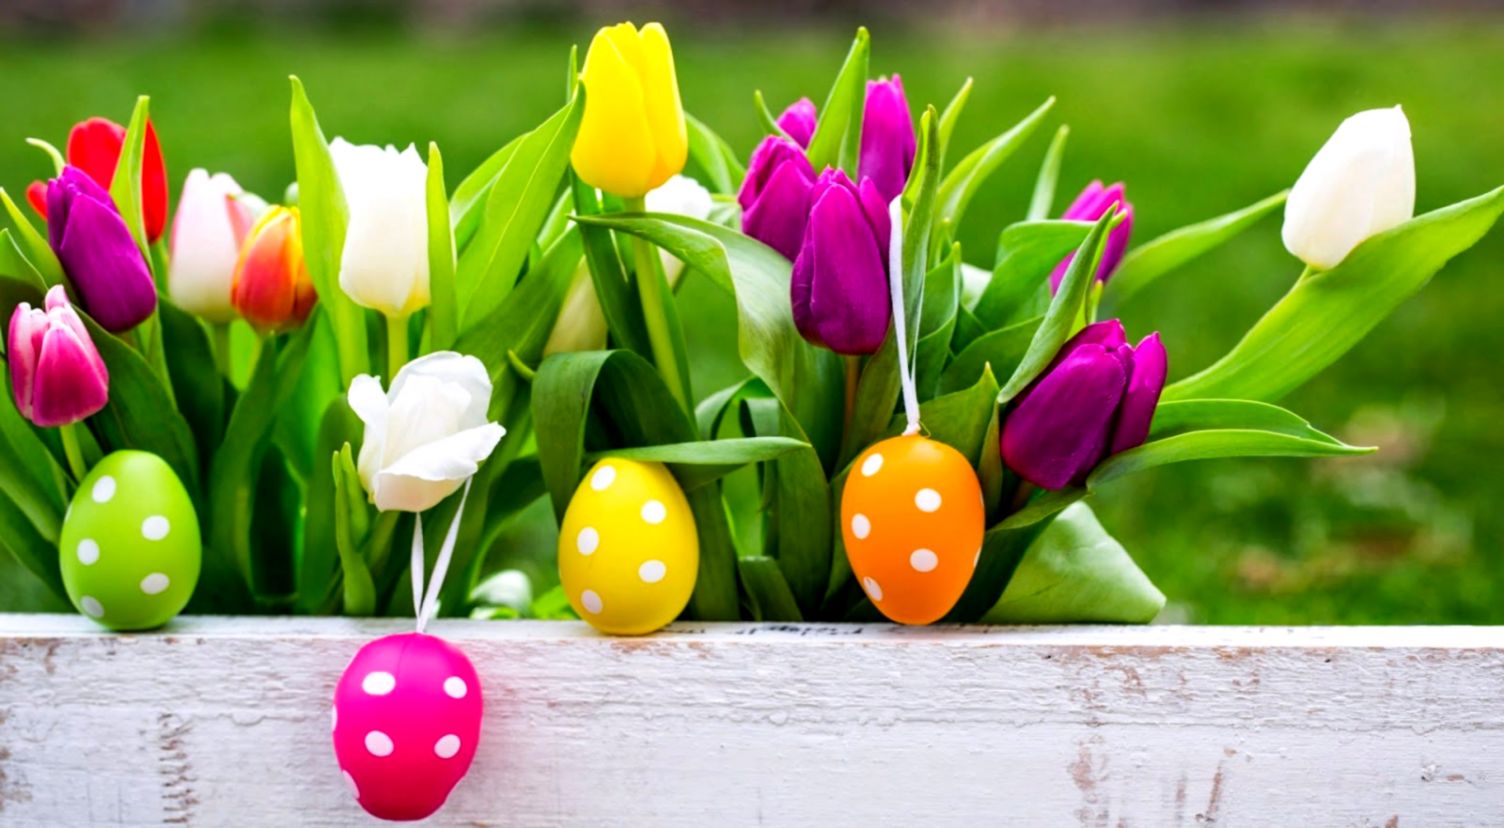 Free Easter Wallpapers Screensavers Hd Easter Images - Easter Eggs And Flowers - HD Wallpaper 